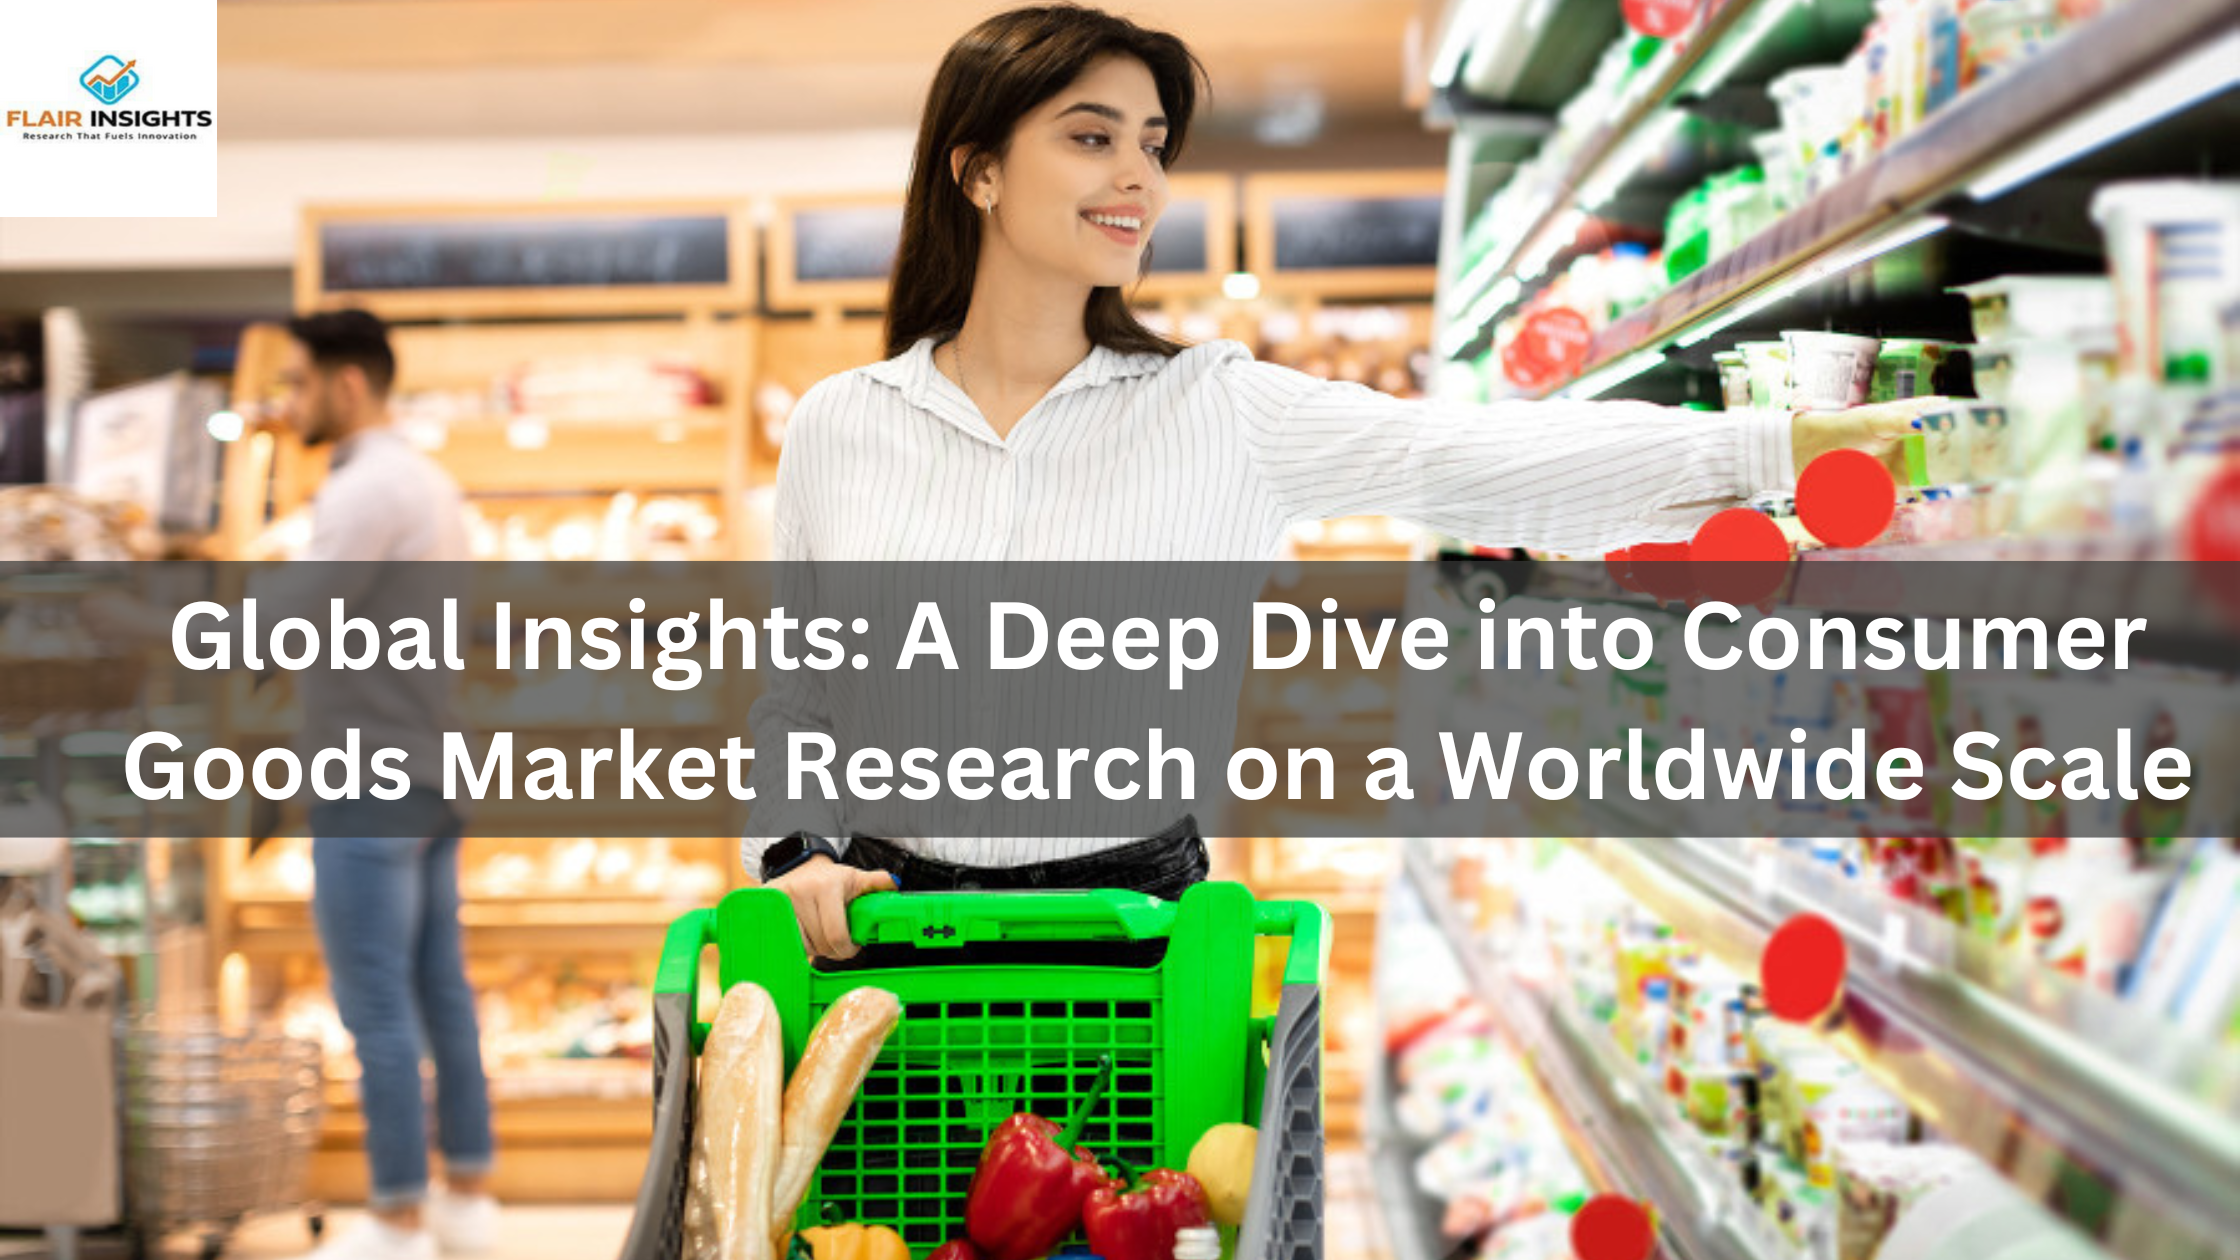 Global Insights: A Deep Dive into Consumer Goods Market Research on a Worldwide Scale